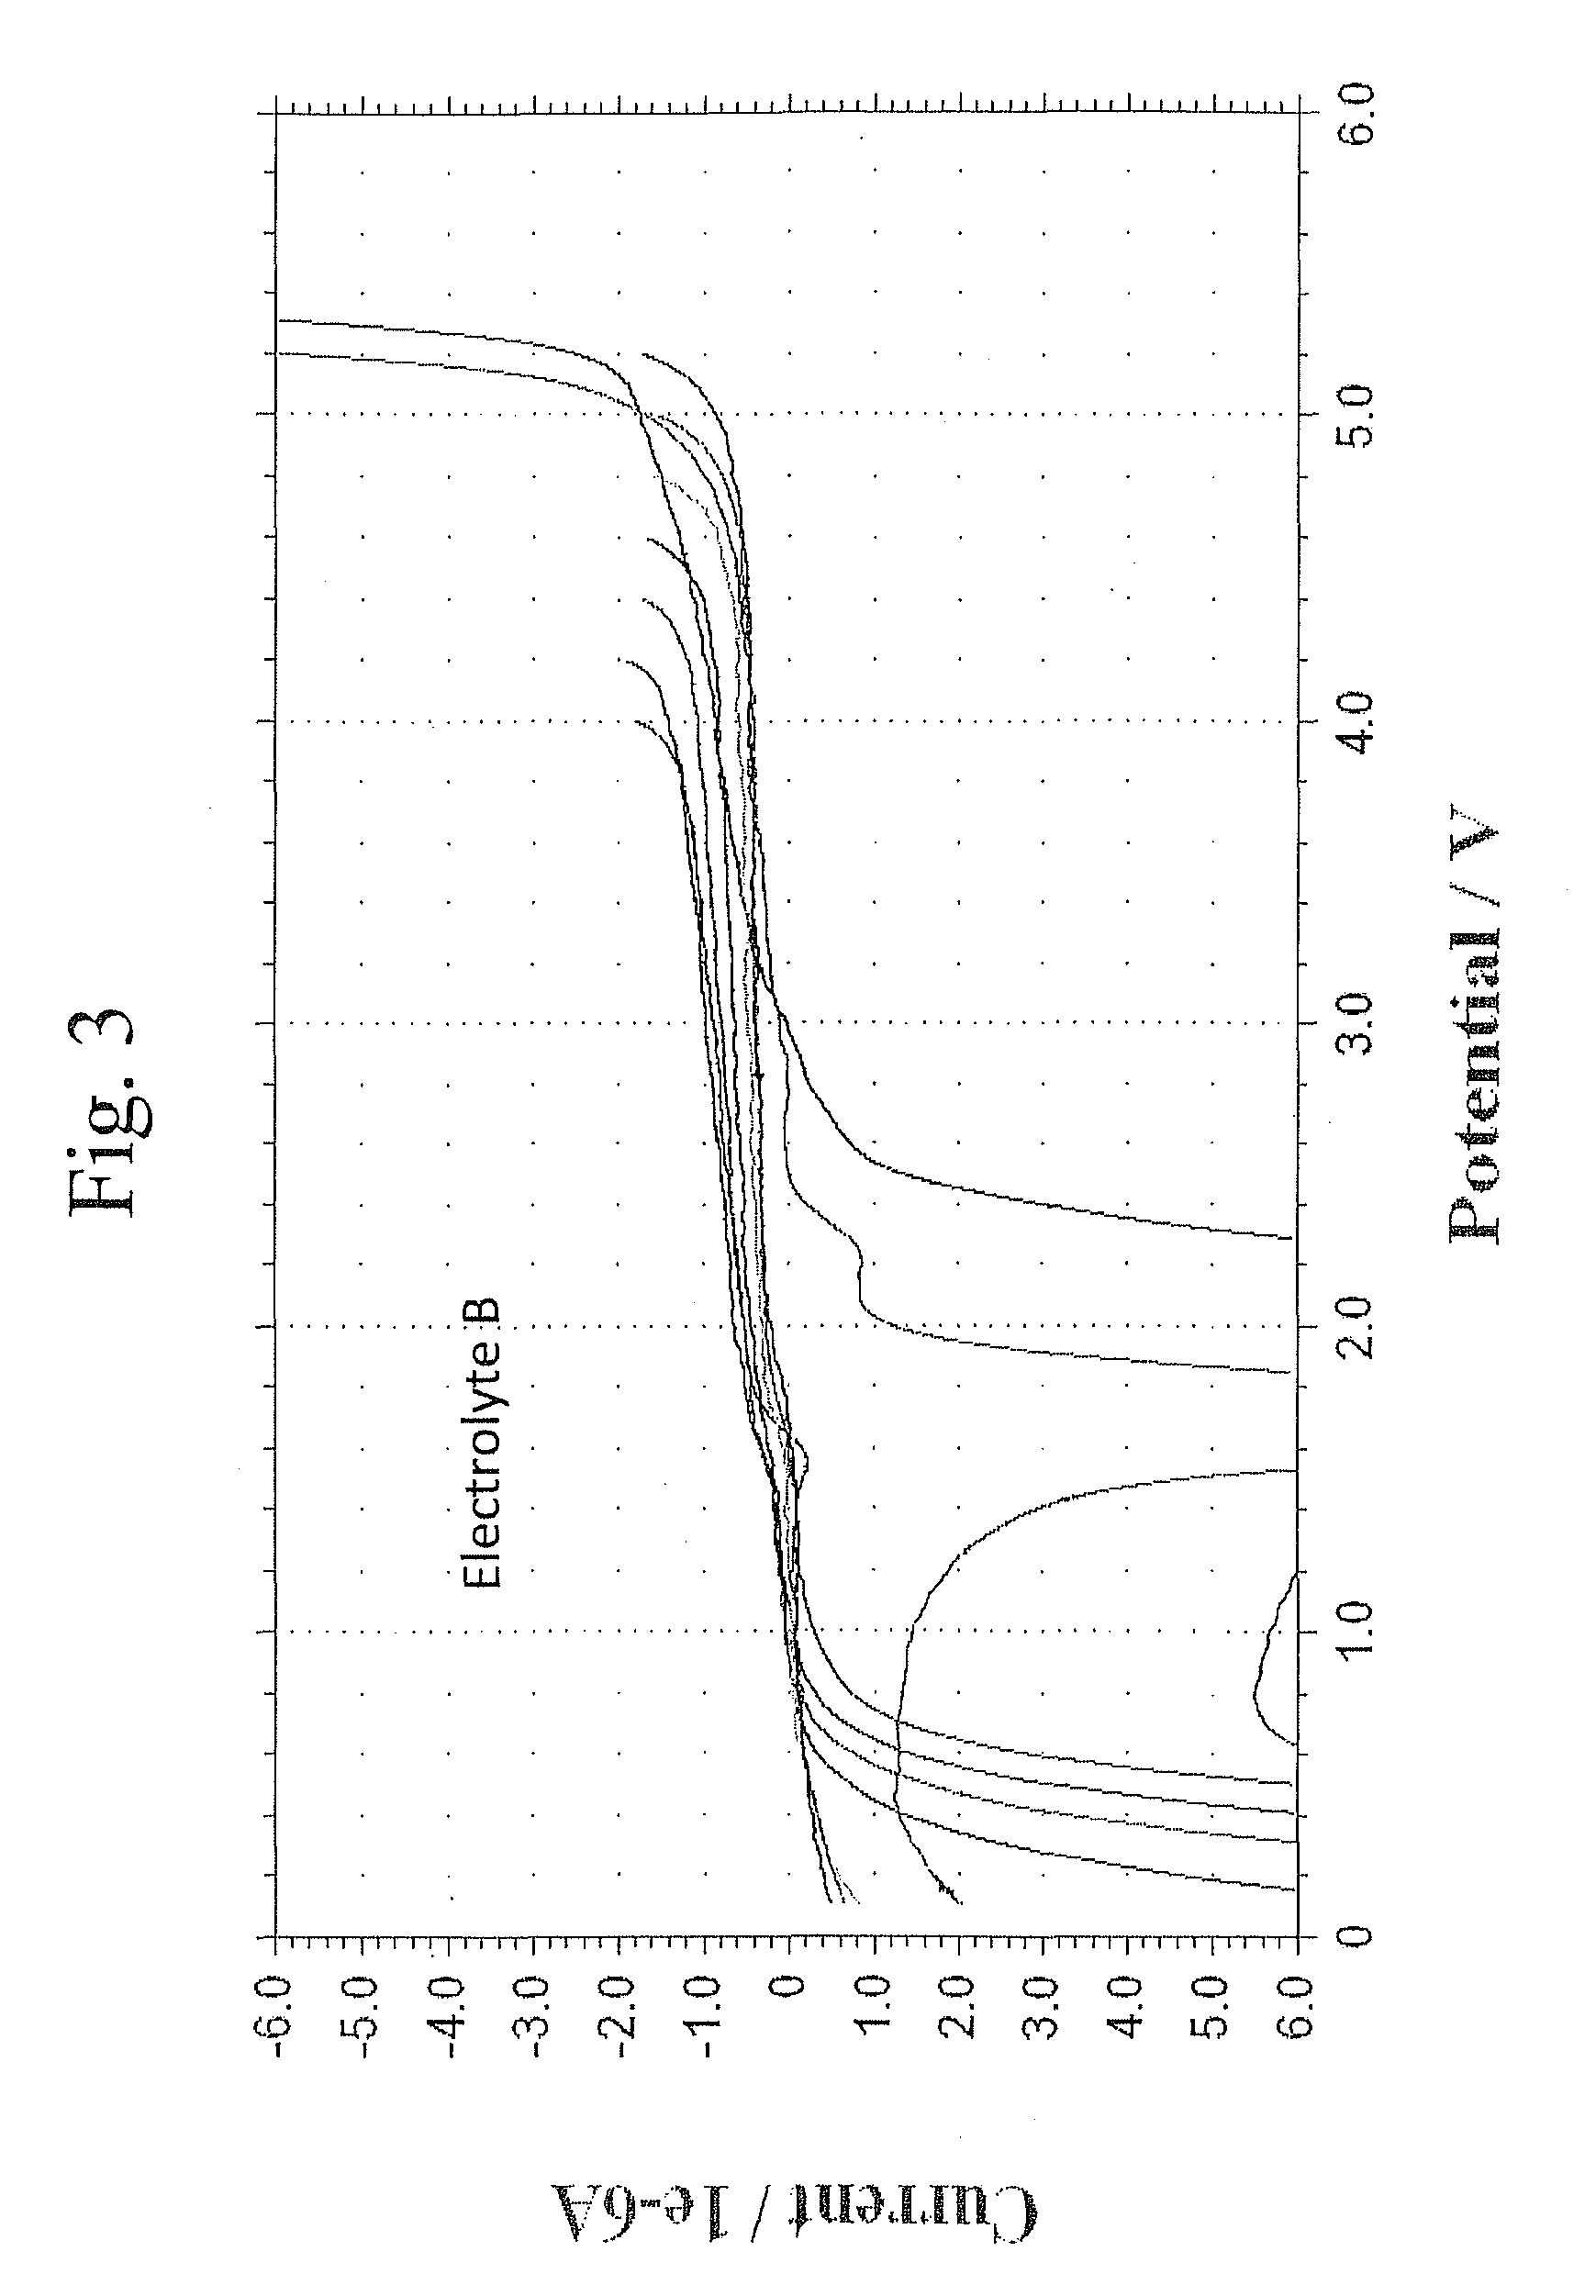 Lithium ion battery with high voltage electrolytes and additives